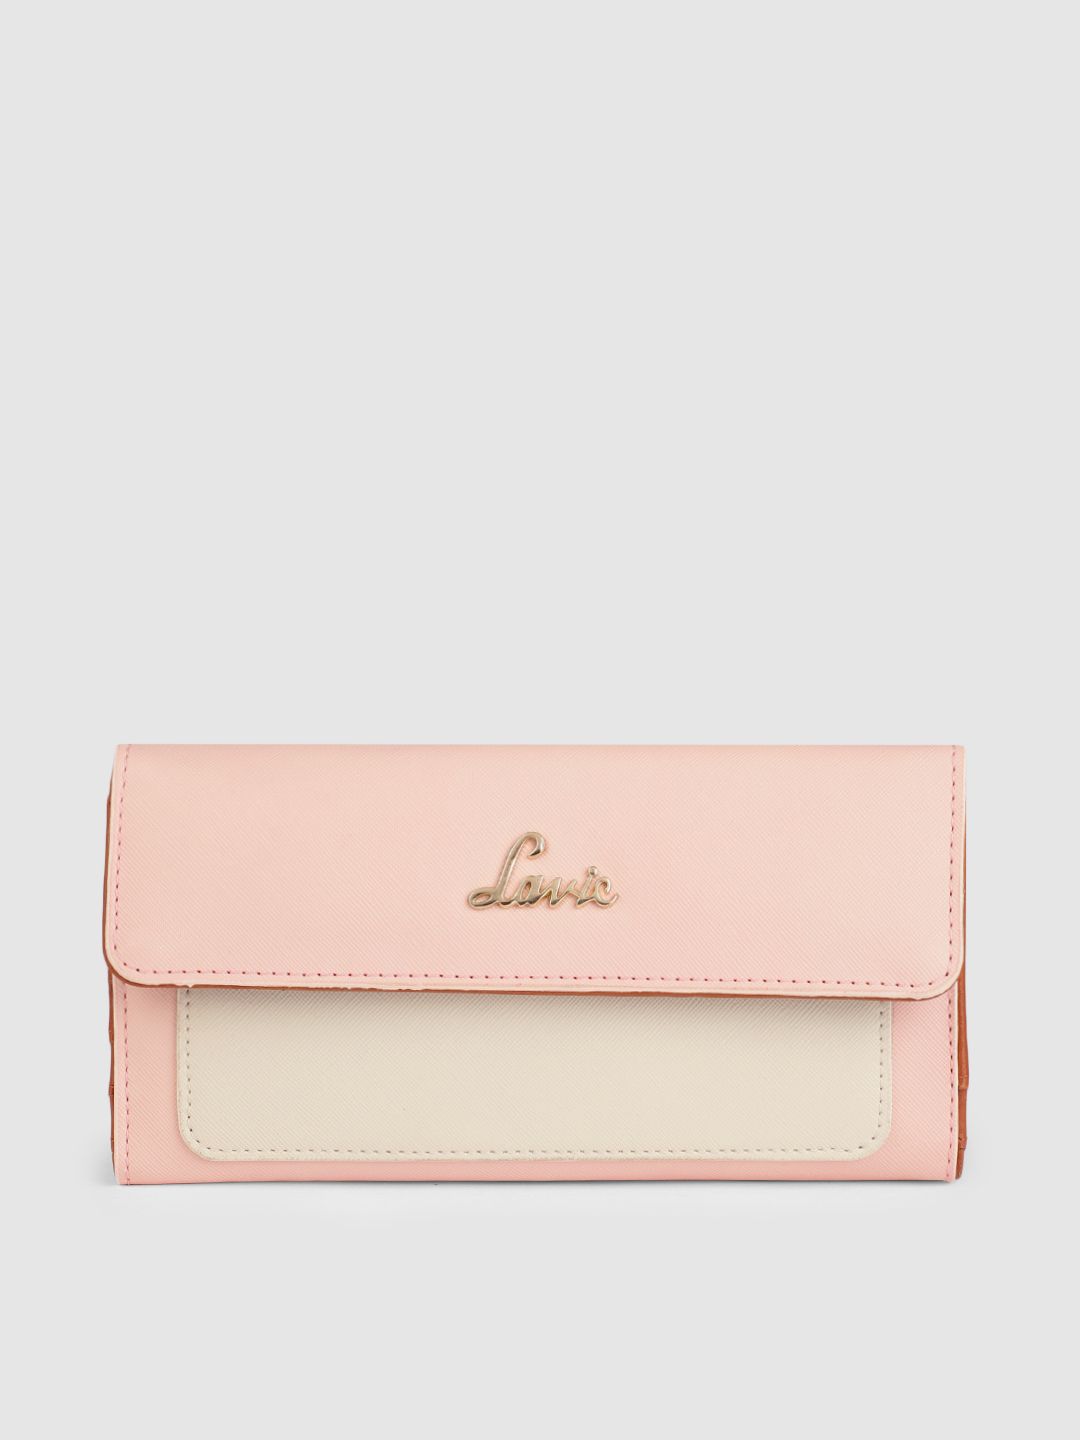 Lavie Women Pink Solid PU Three Fold Wallet Price in India